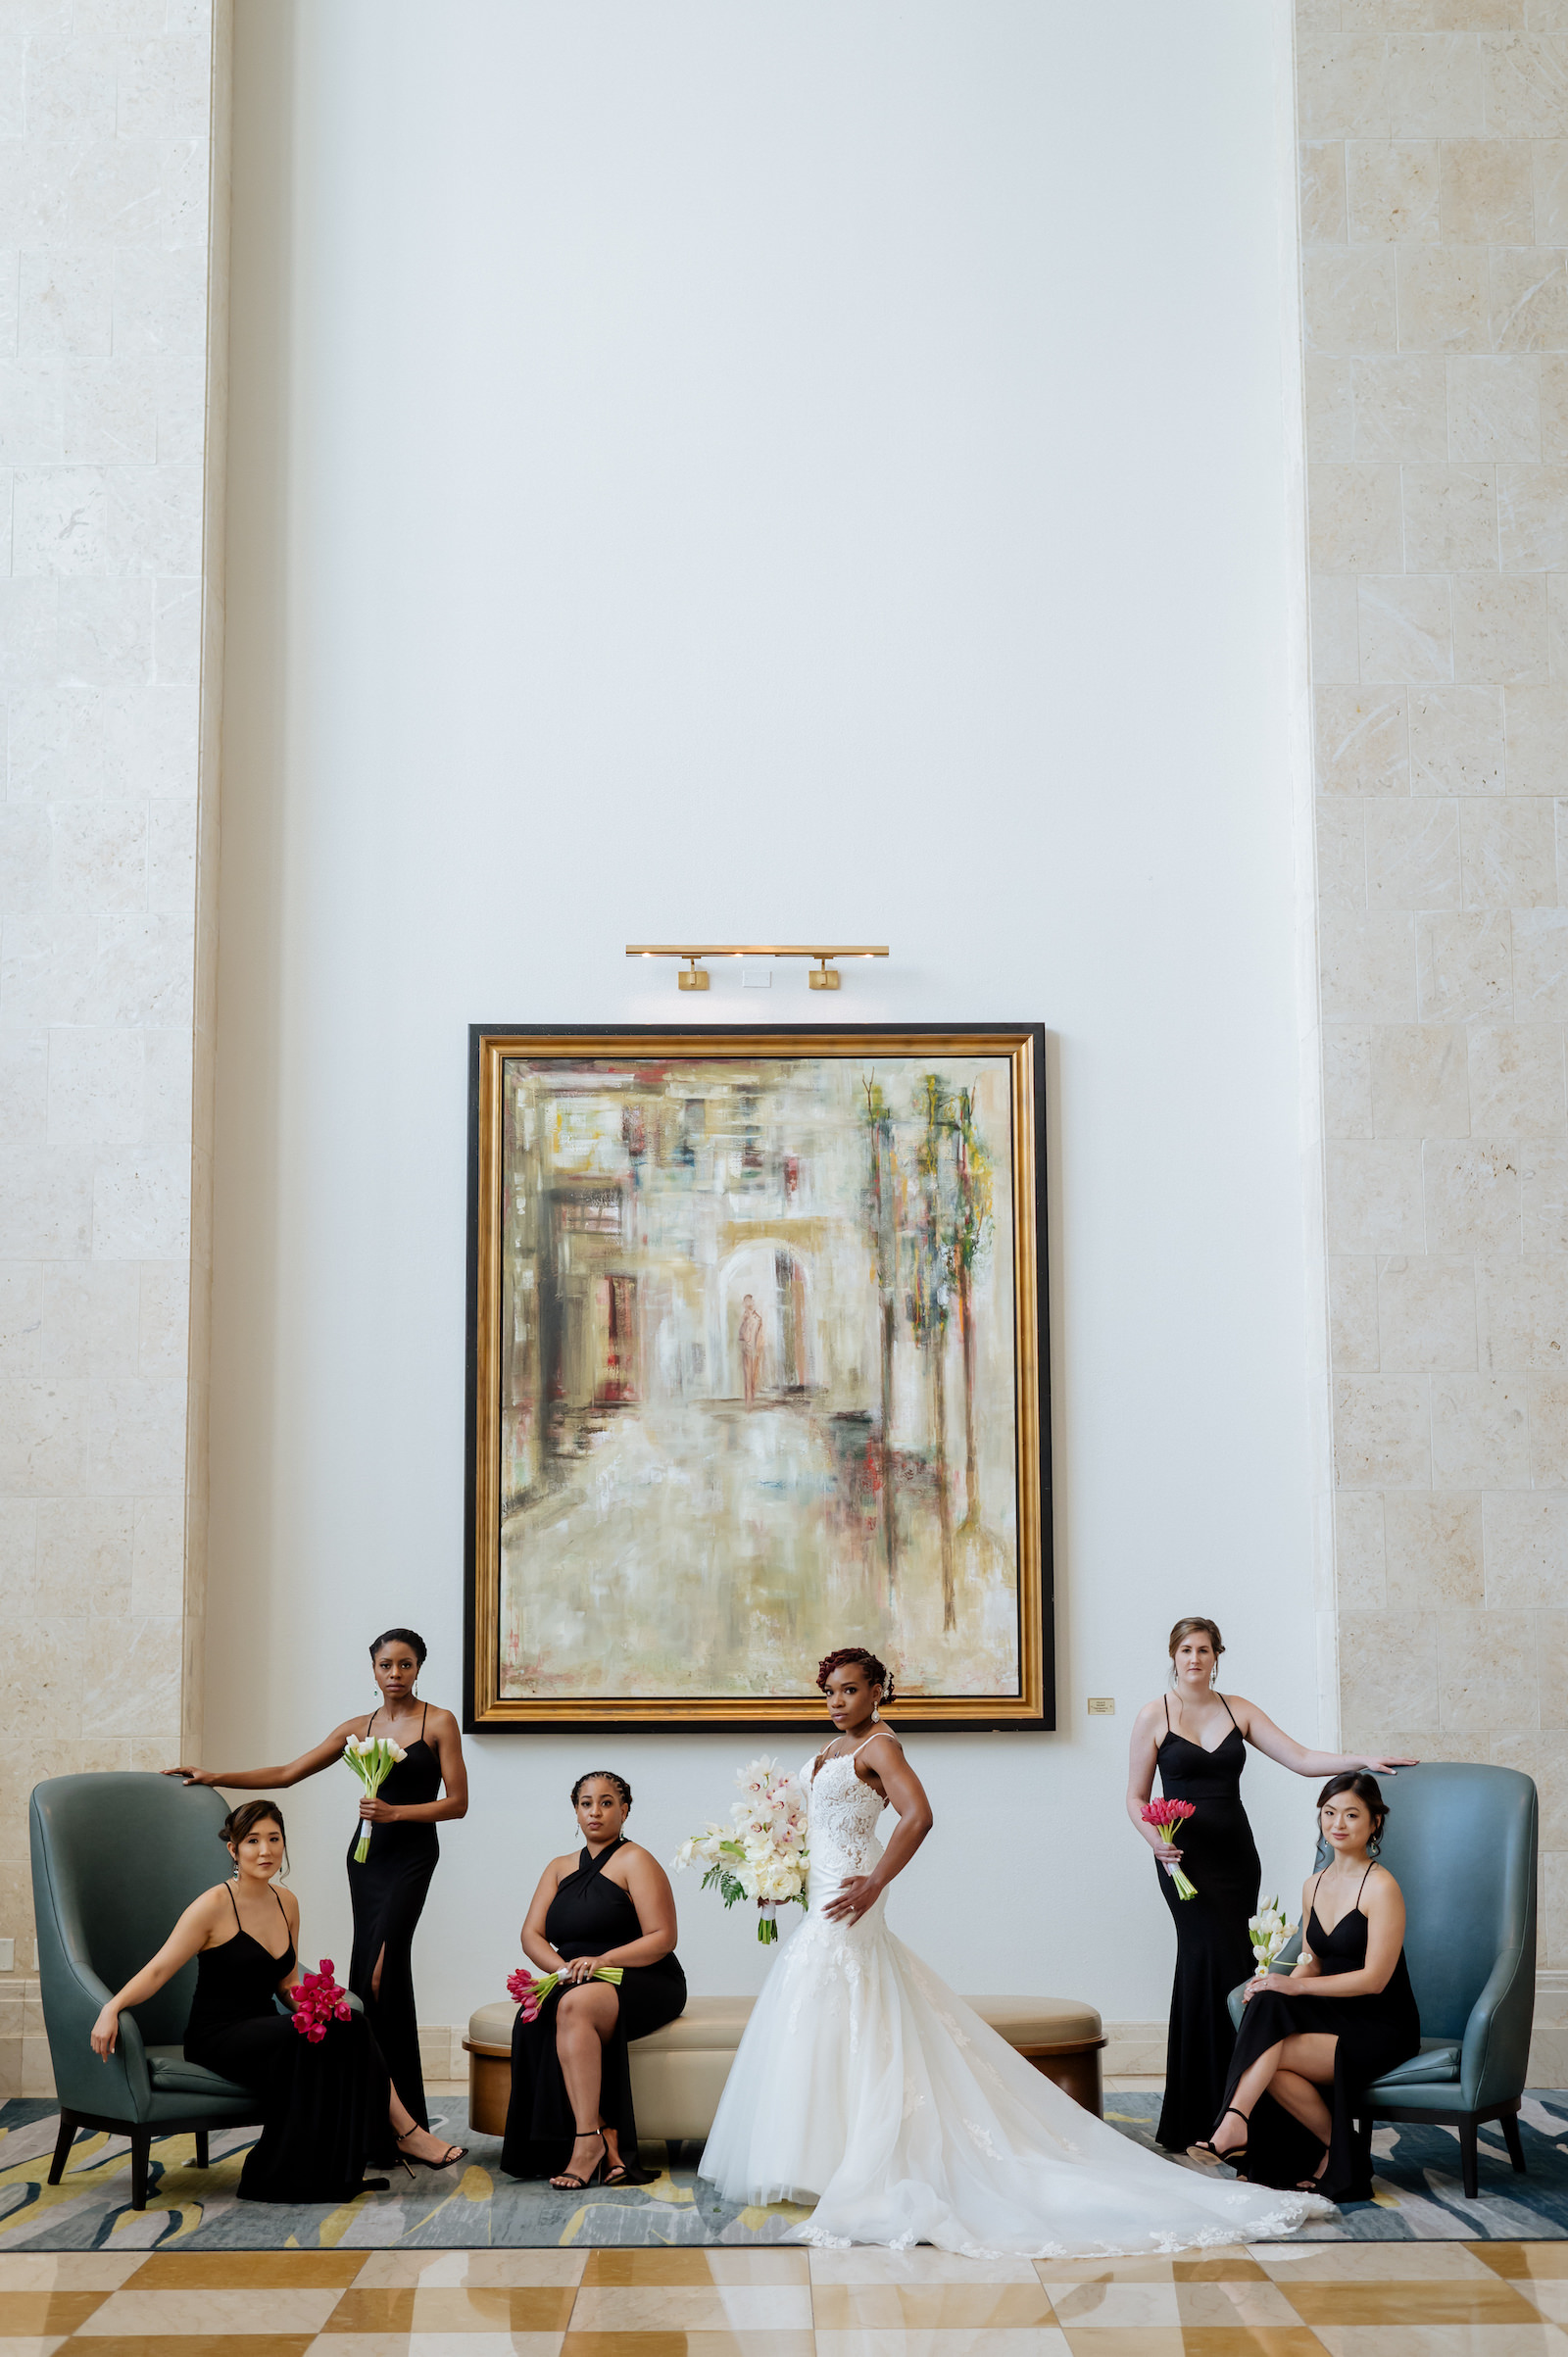 Bride and Bridesmaids Indoor Portrait | Ivory Spaghetti Strap Scoop Back Lace and Tulle Mermaid Martina Liana Wedding Dress Bridal Gown | Black Long Jenny Yoo Bridesmaid Dresses from Tampa Dress Shop Bella Bridesmaids